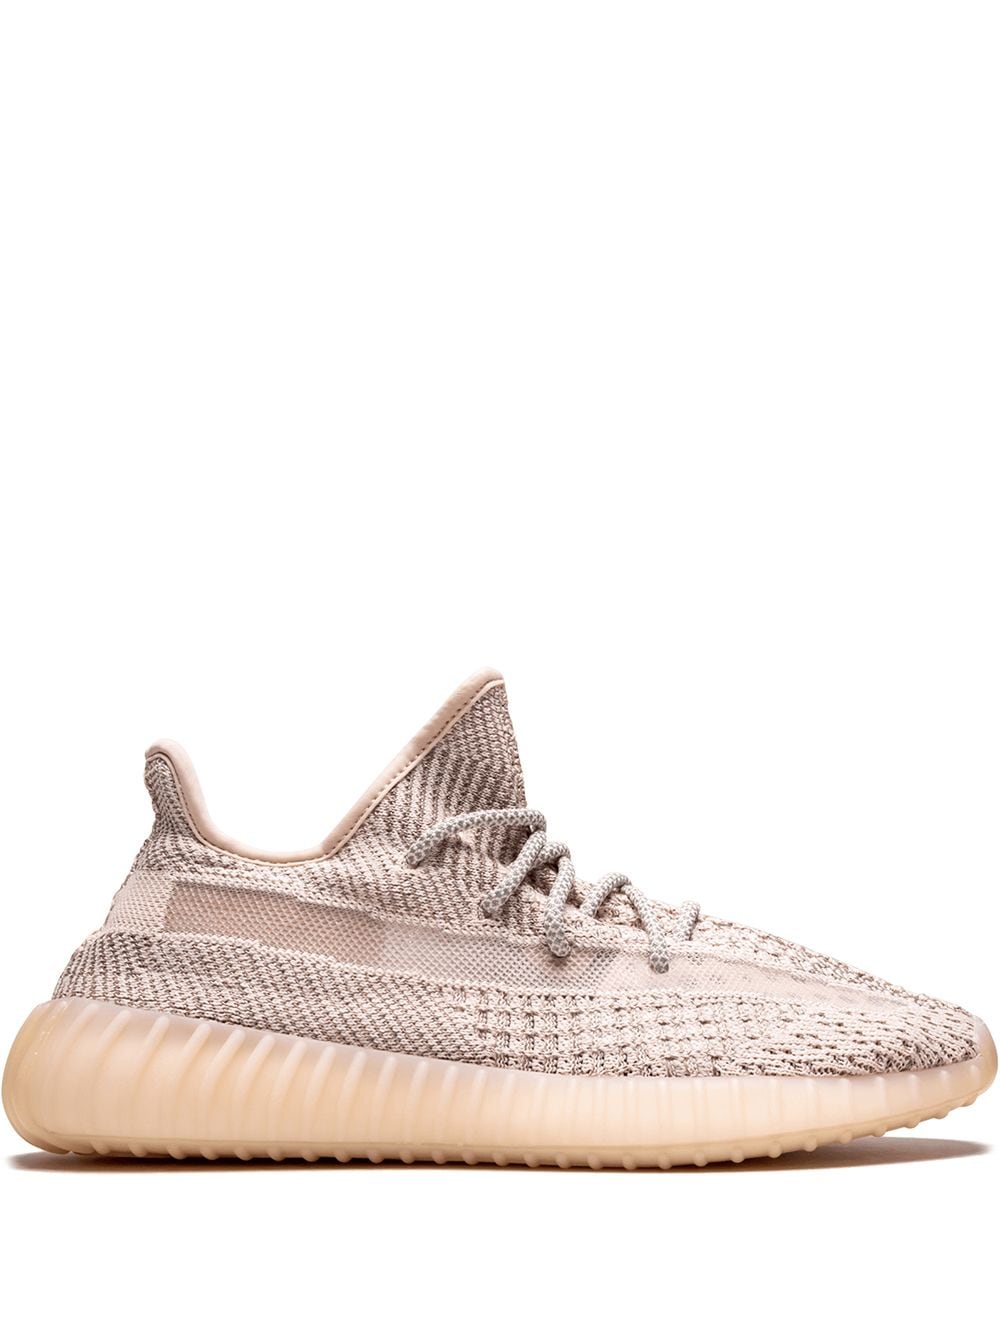 adidas Yeezy YEEZY Boost 350 V2 "Synth" sneakers - Neutrals von adidas Yeezy